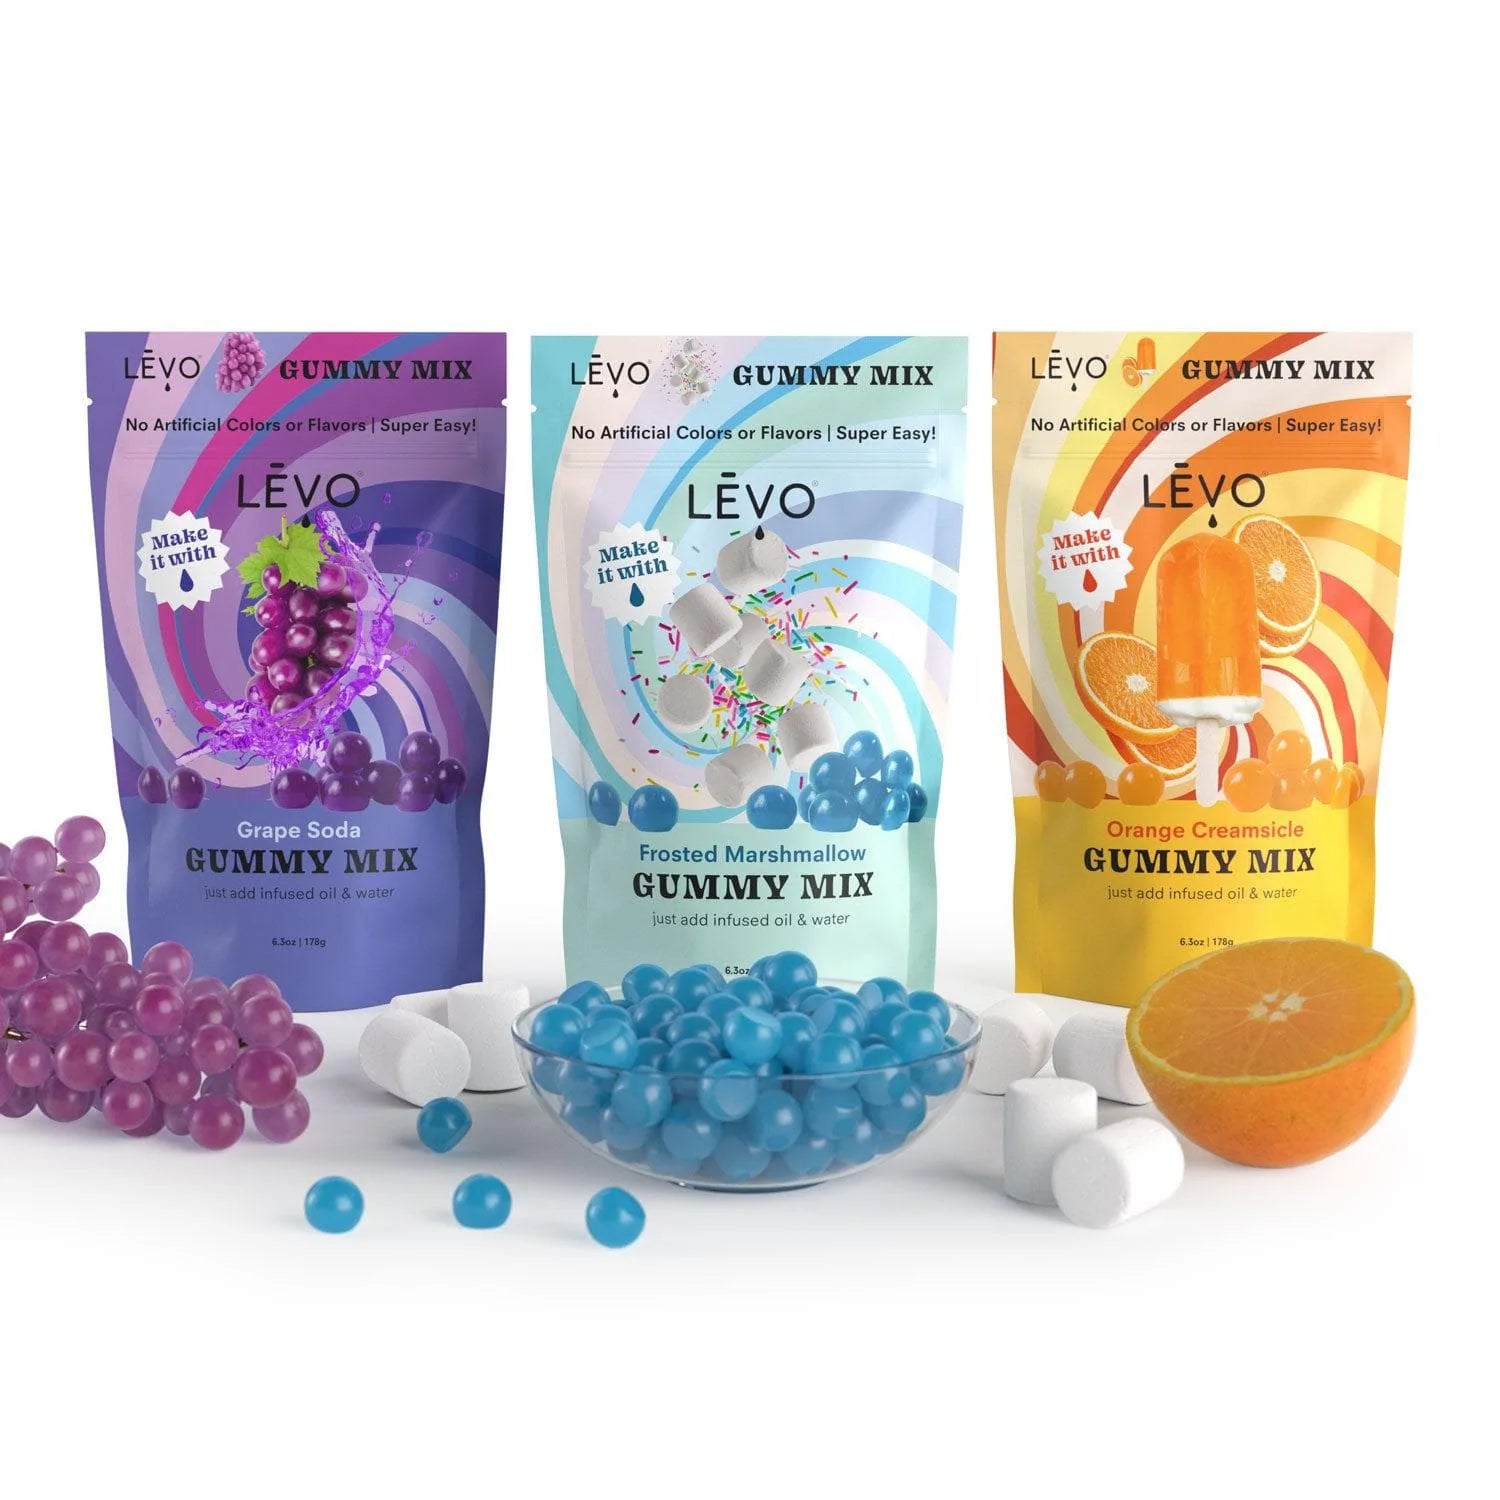 Buy more, save more! Subscribe to LEVO gummy mix trio for monthly shipments and save 10%.